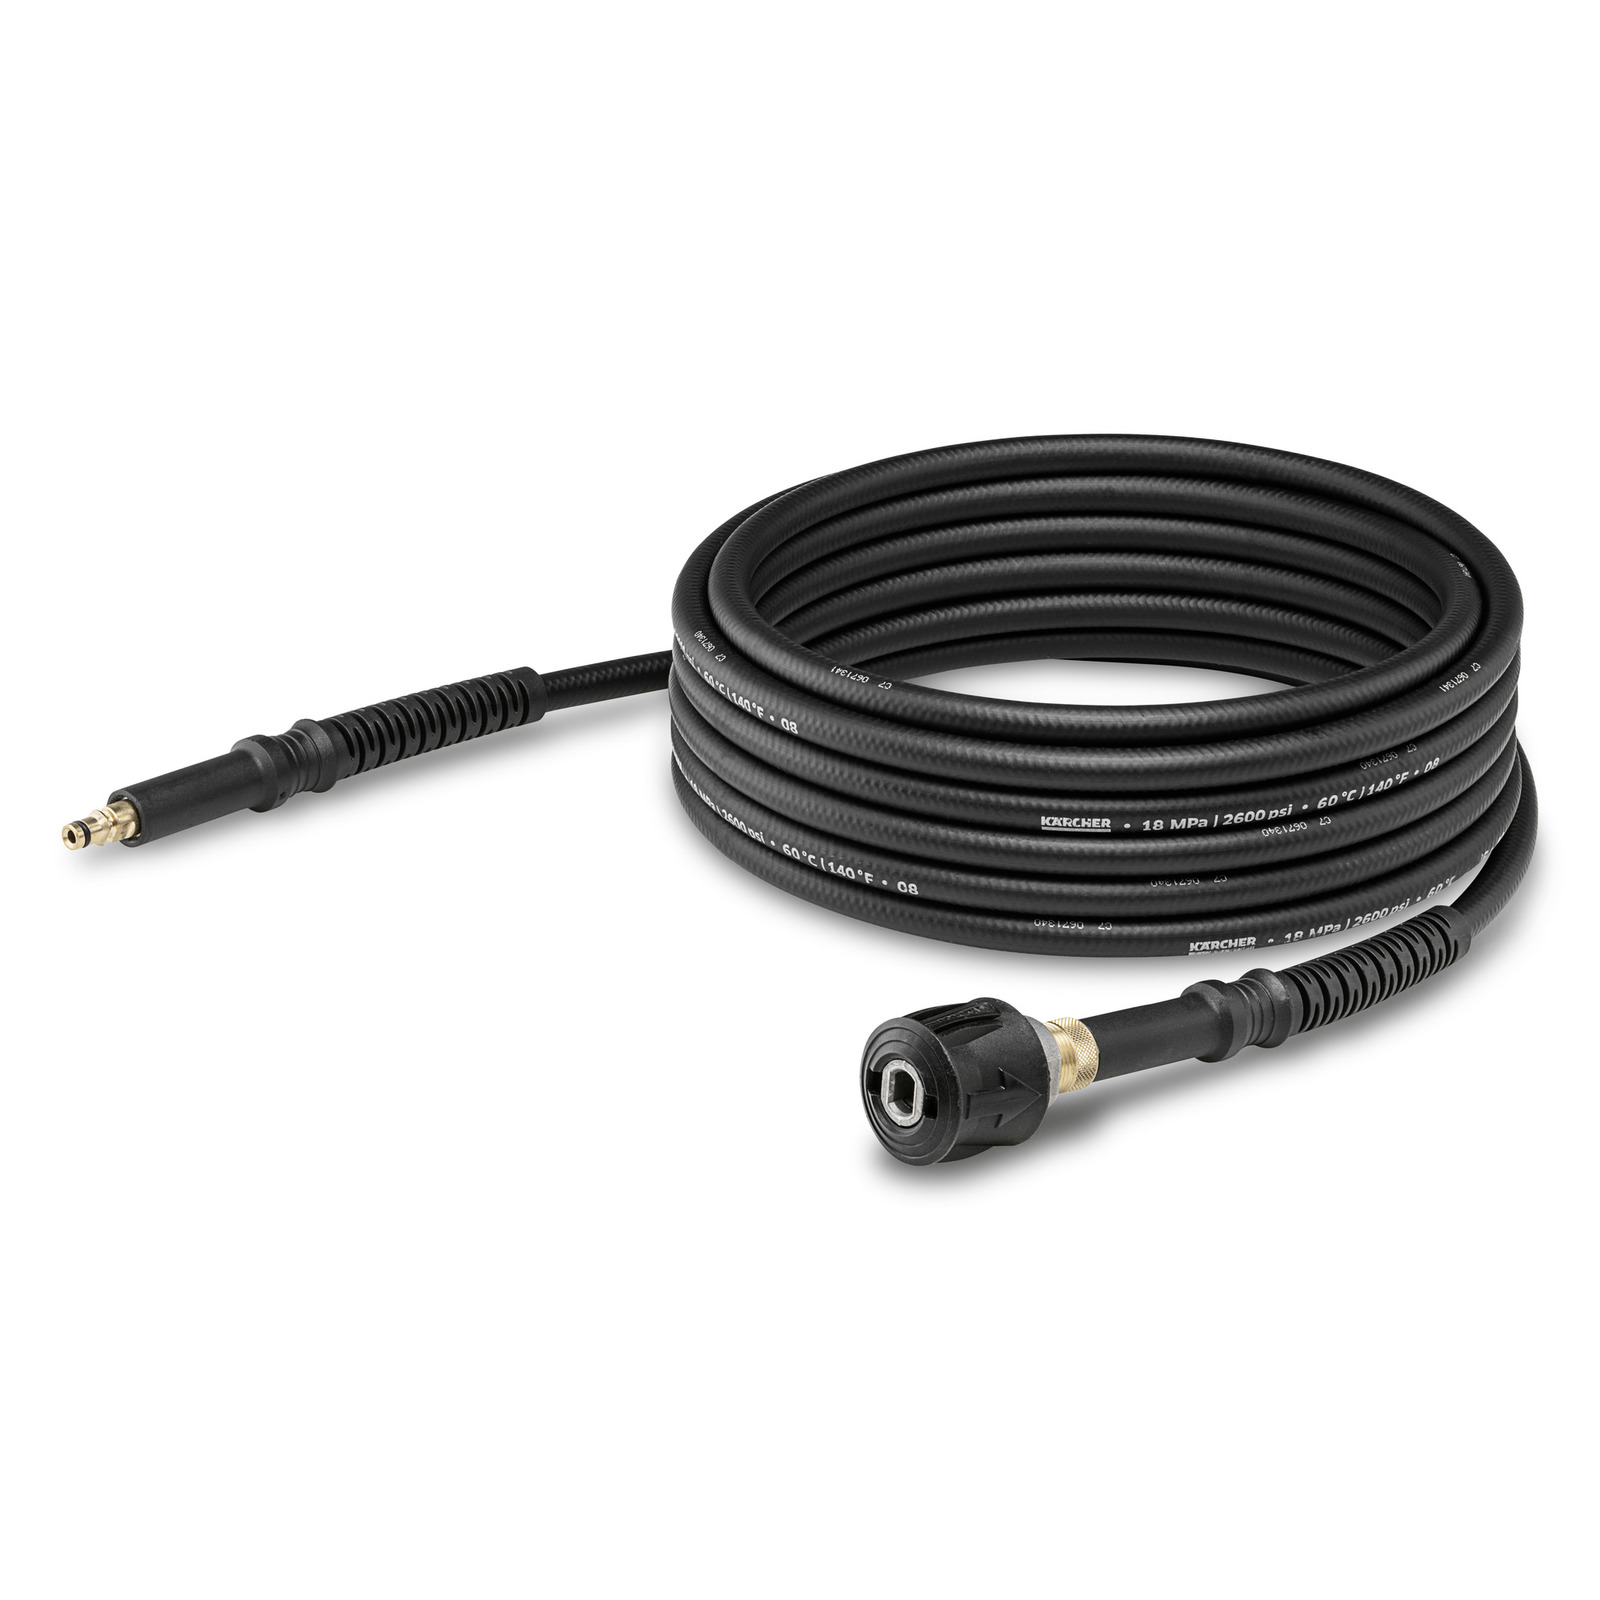 10m HIGH PRESSURE EXTENSION HOSE KARCHER PROFESSIONAL STEAM CLEANERS JET WASHER 